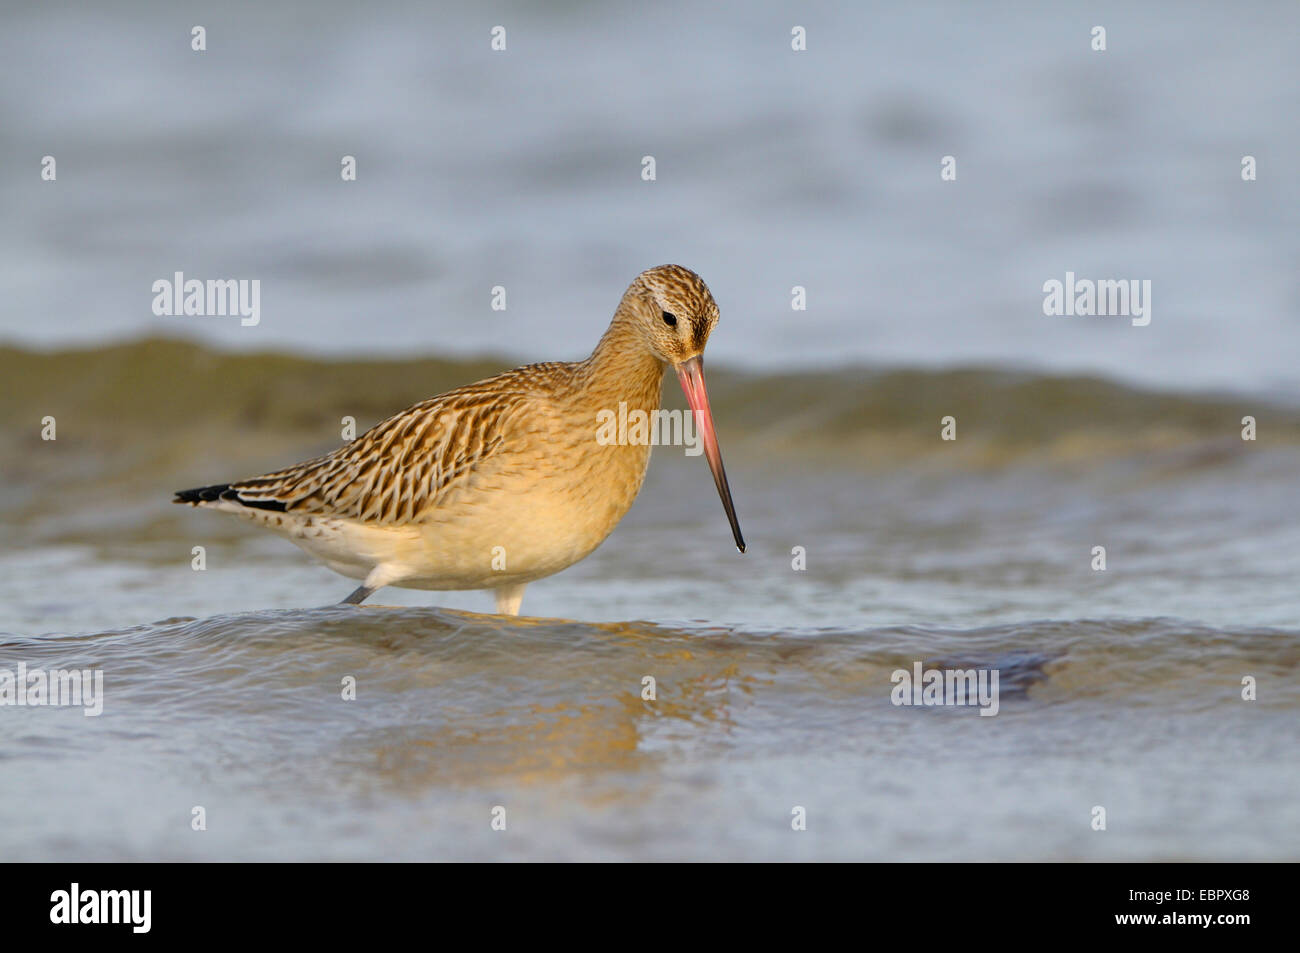 bar-tailed godwit (Limosa lapponica), on the feed in the surf of the Baltic Sea, Germany, Mecklenburg-Western Pomerania, Western Pomerania Lagoon Area National Park Stock Photo